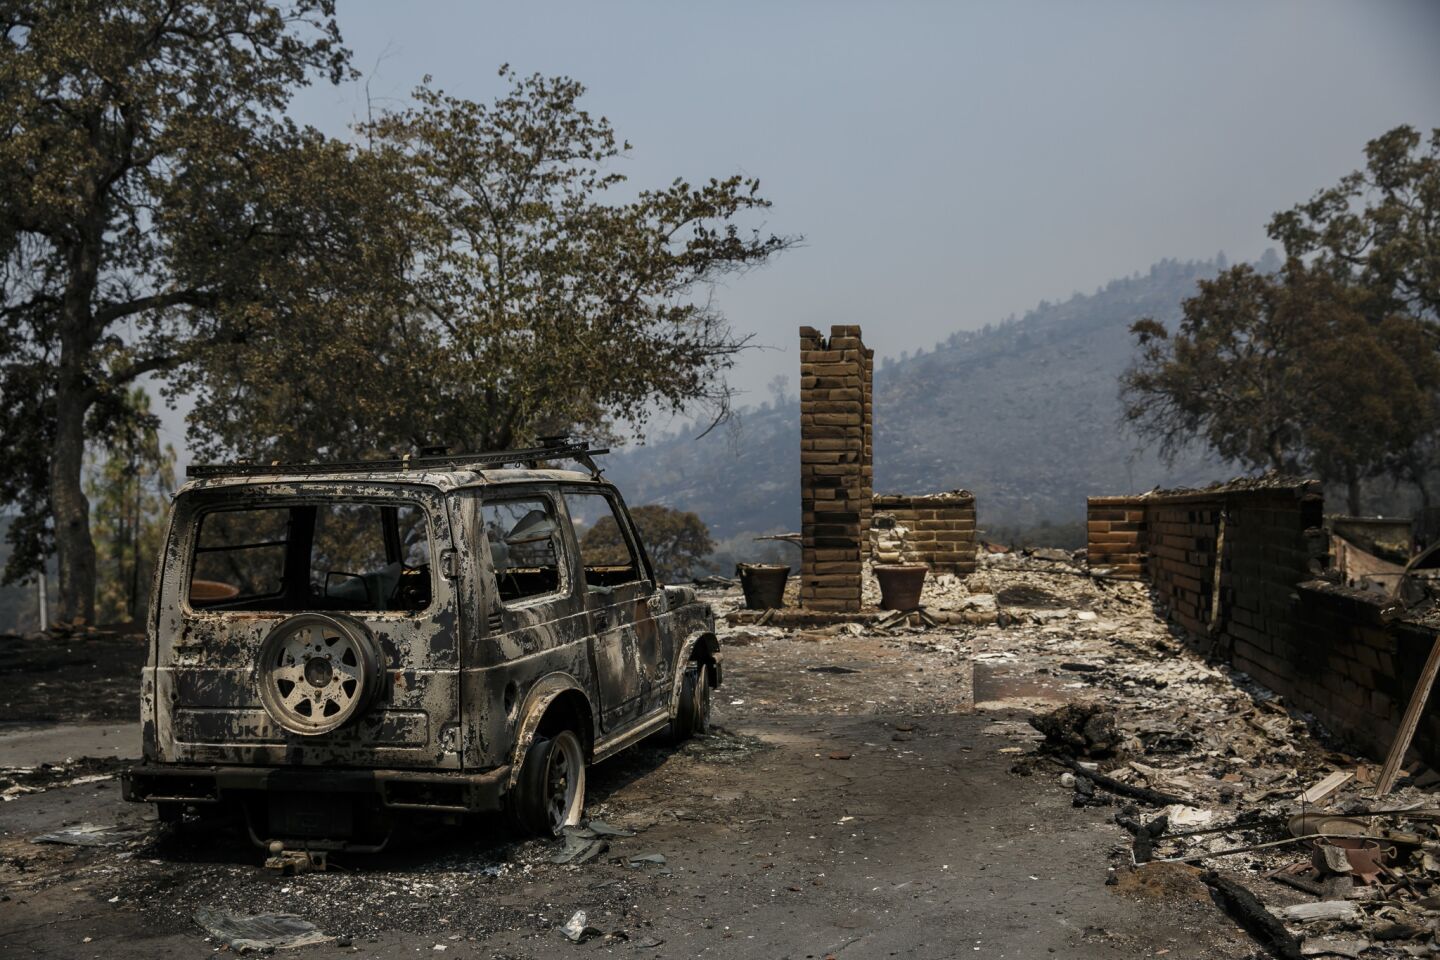 A home destroyed in the Detwiler Fire along Hunters Valley Road near Mariposa, Calif. The blaze has now burned more than 70,000 acres and is 10% contained.